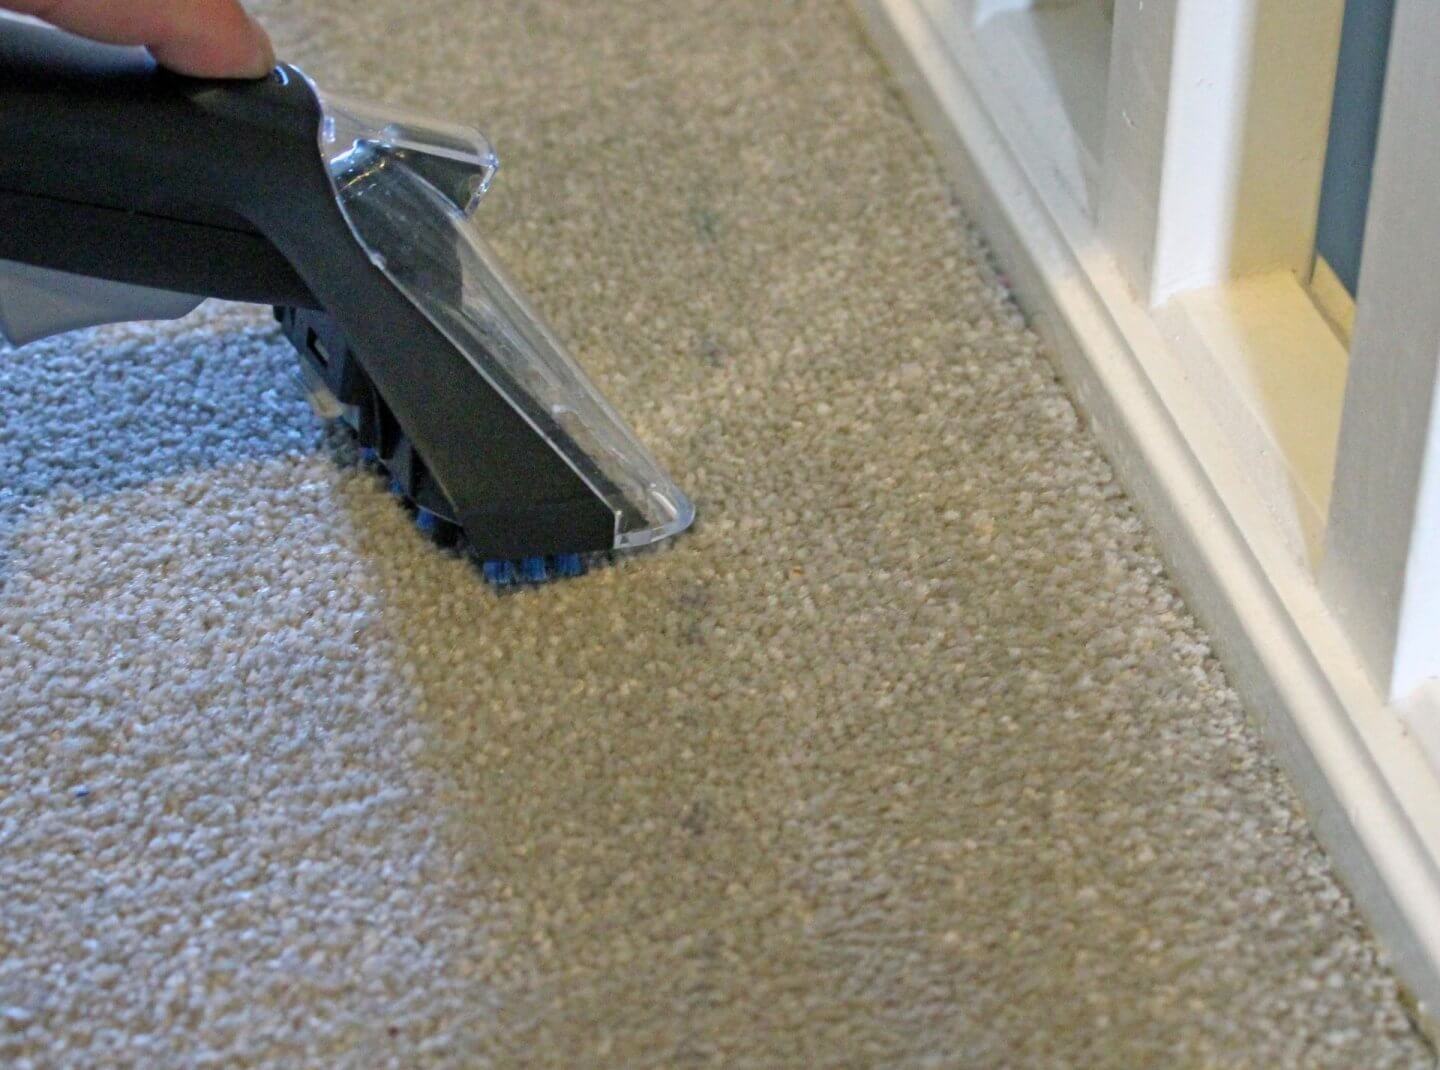 Floor cleaner and clean carpet